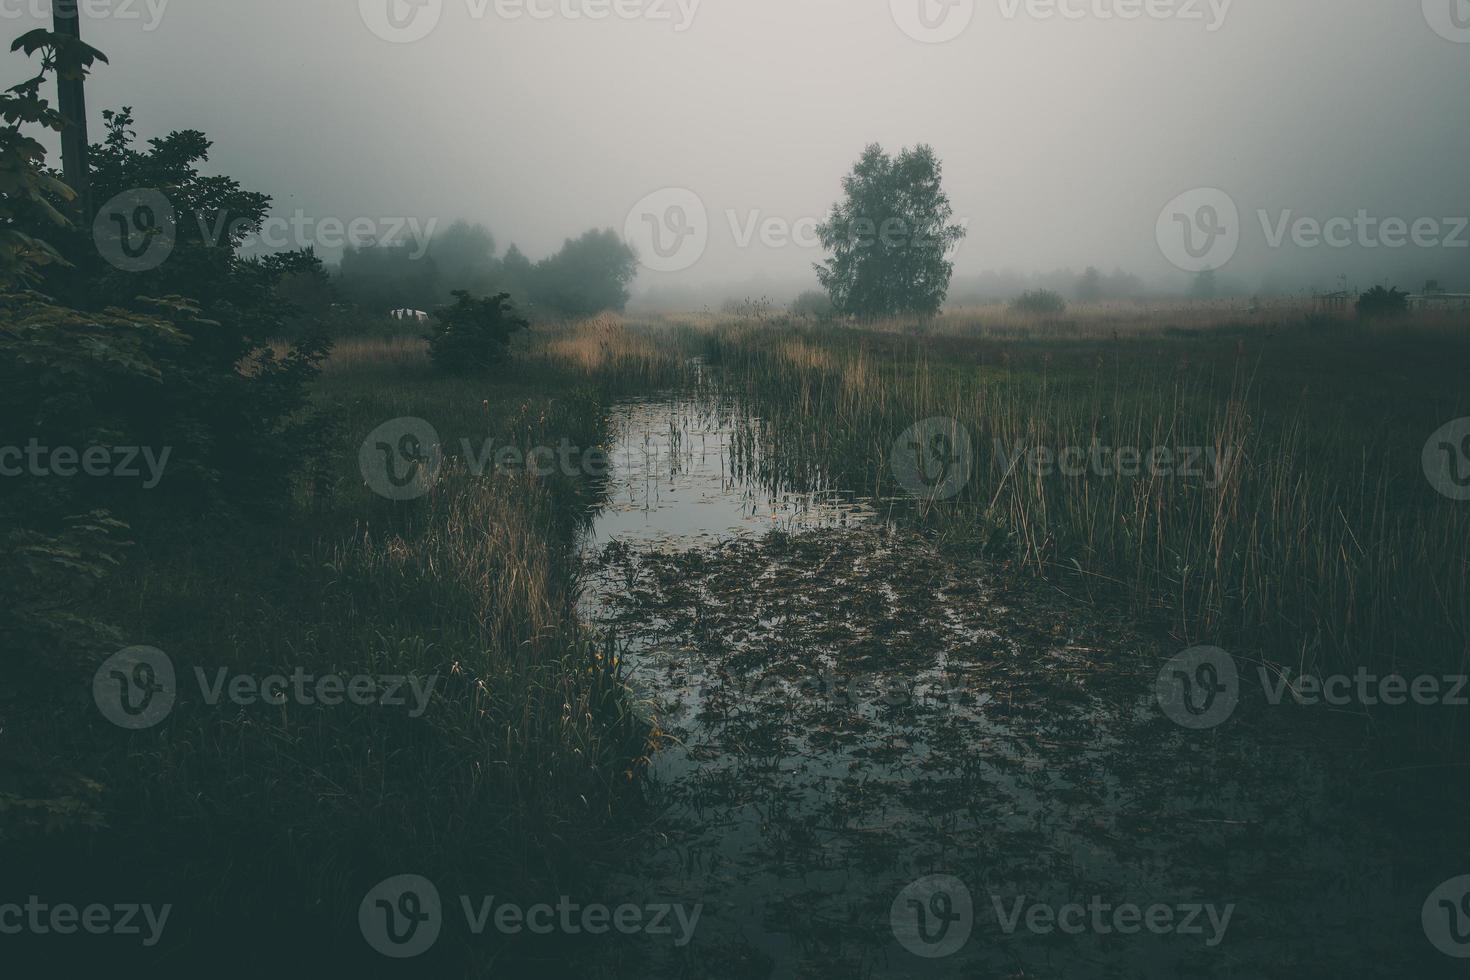 lttle narrow river flowing through the meadow on gray misty day photo